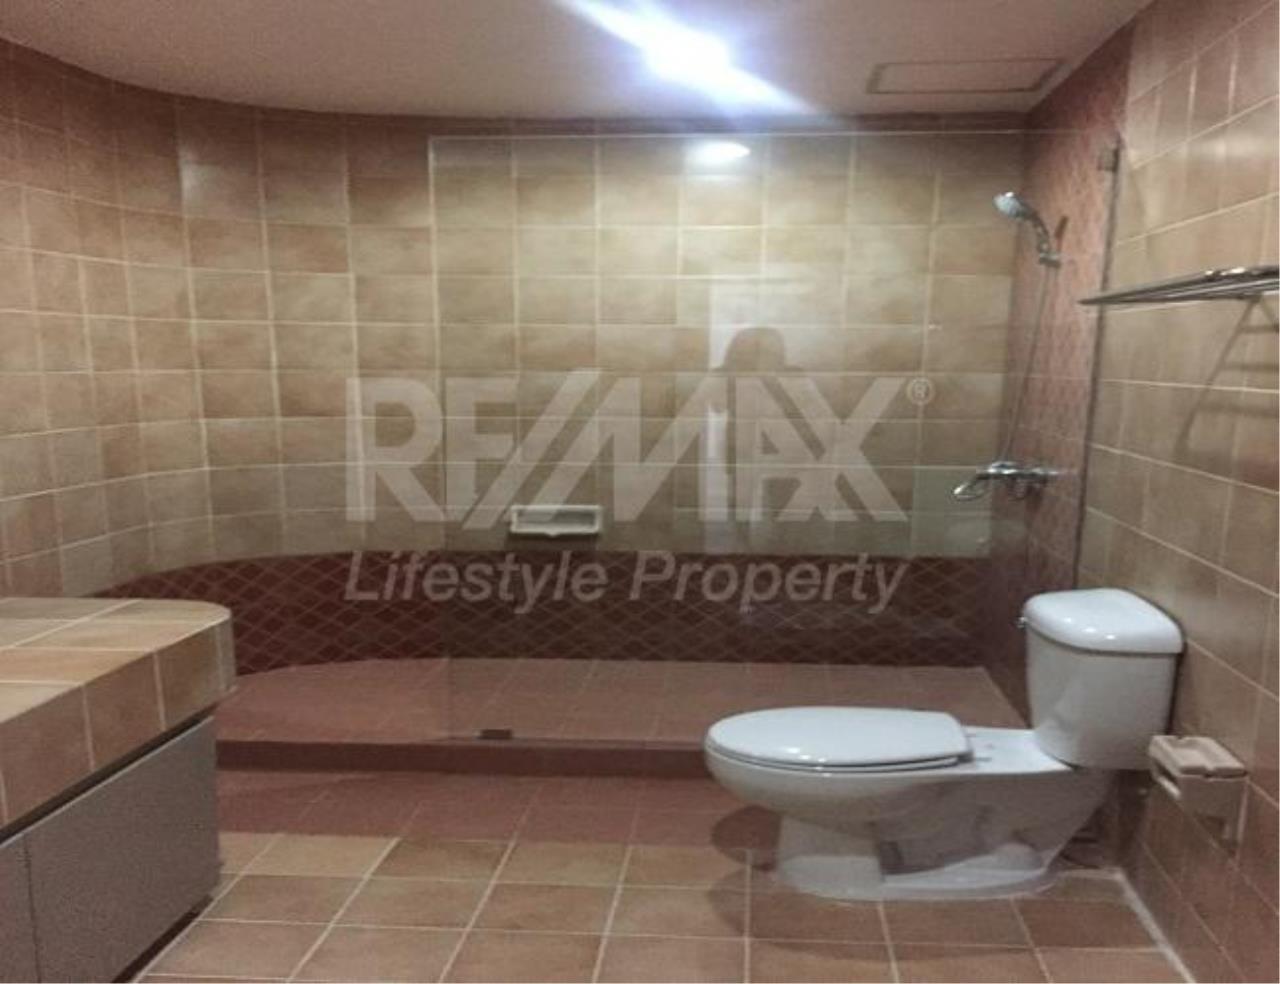 RE/MAX LifeStyle Property Agency's Oriental Towers 1